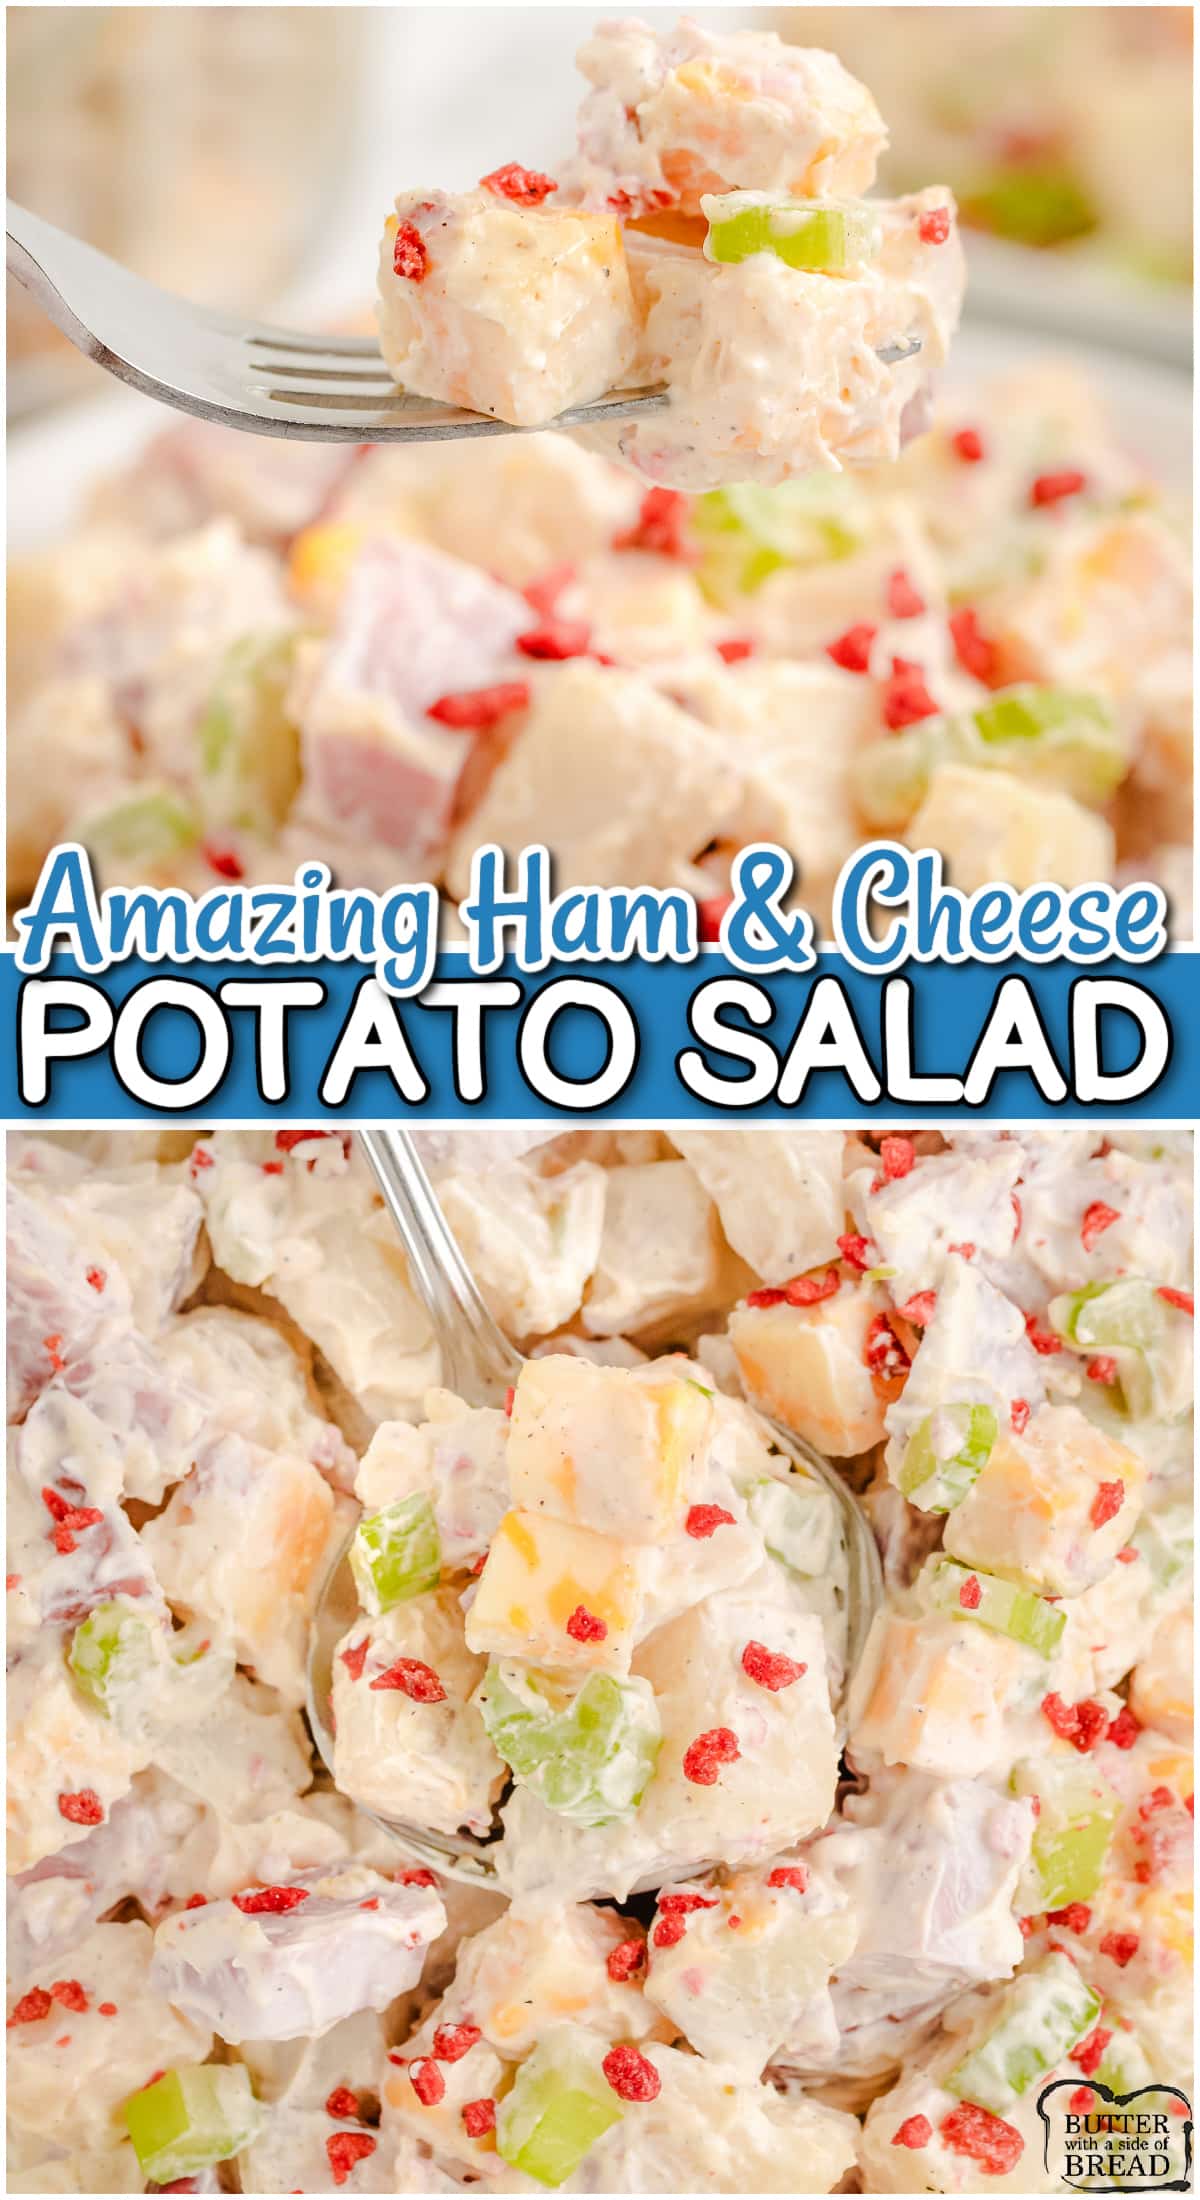 Delicious, hearty Ham and Cheese Potato Salad perfect for potlucks! Take this easy potato salad up a notch with the savory additions of ham and cheddar that everyone goes crazy over!